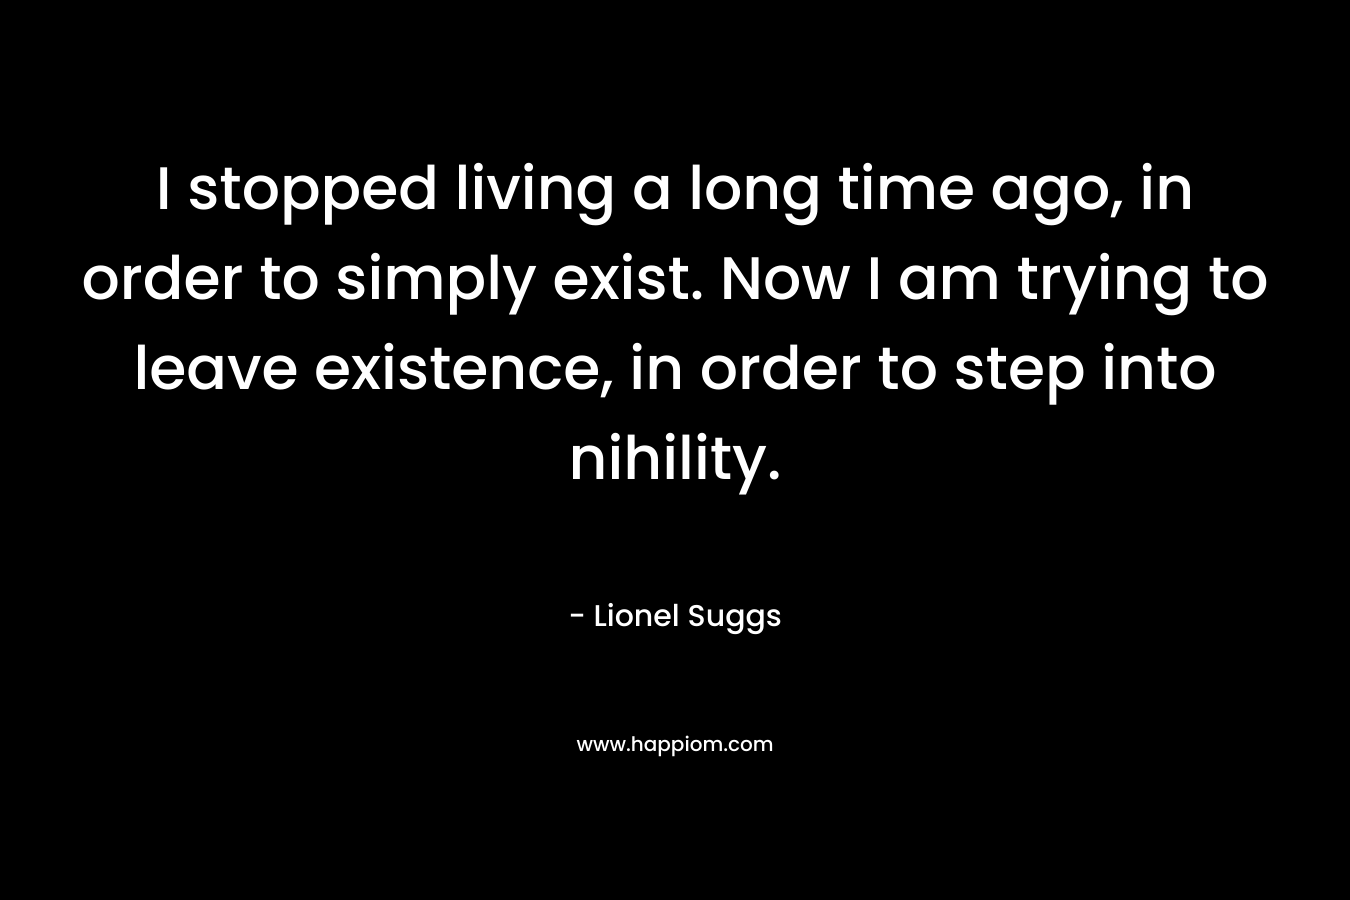 I stopped living a long time ago, in order to simply exist. Now I am trying to leave existence, in order to step into nihility. – Lionel Suggs